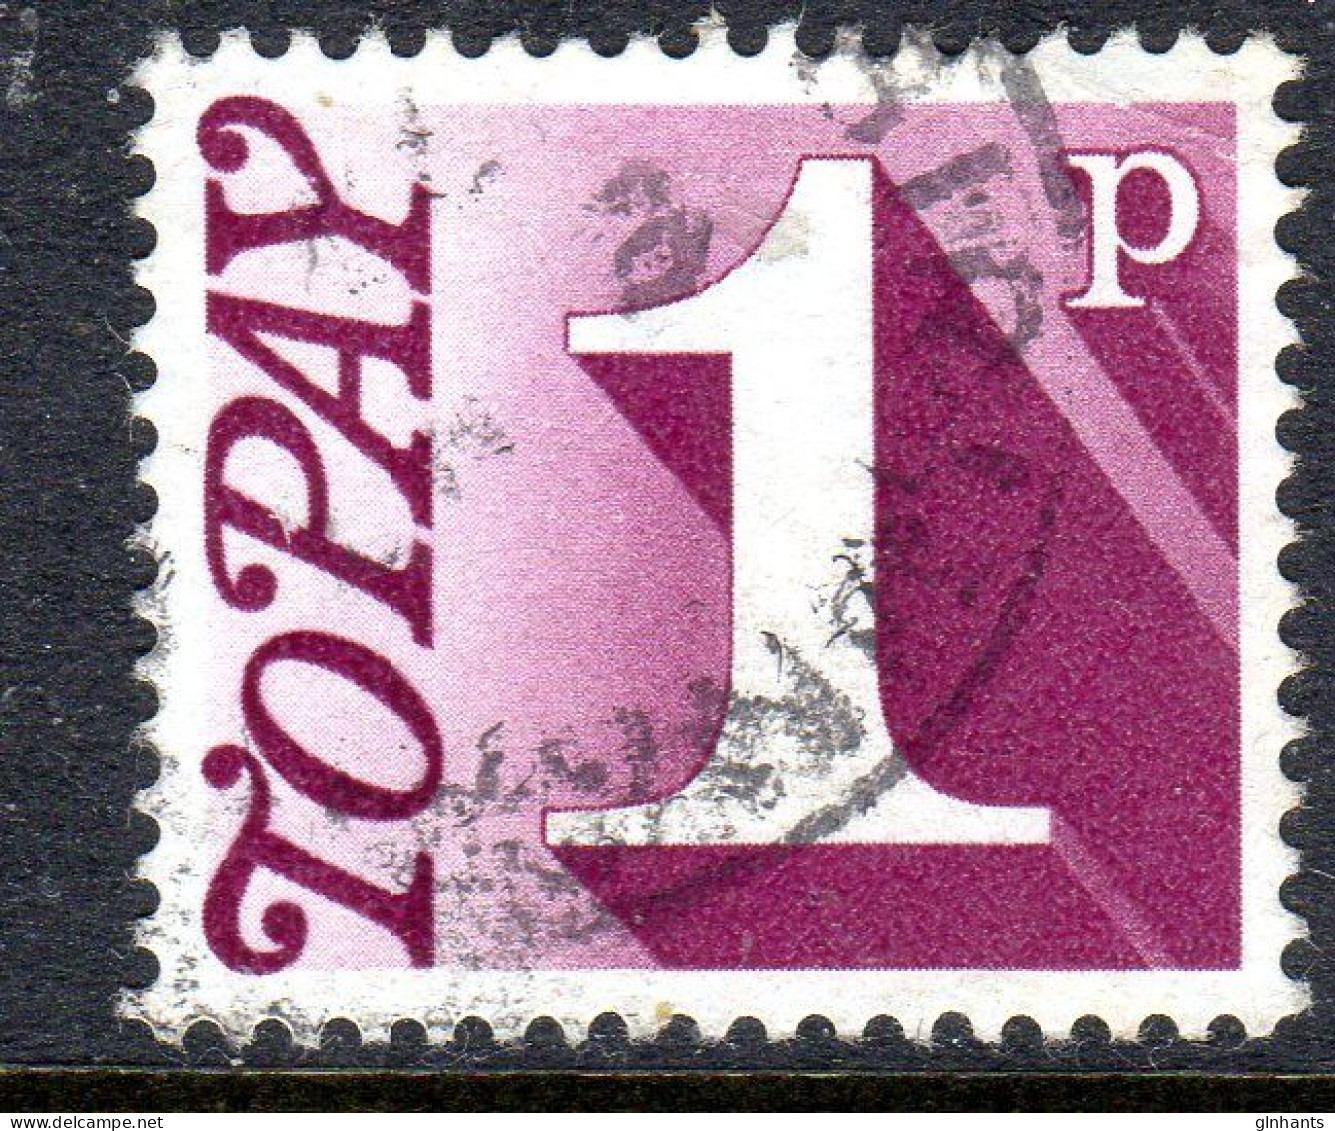 GREAT BRITAIN GB - 1970 POSTAGE DUE 1p STAMP FINE USED SG D78 - Postage Due